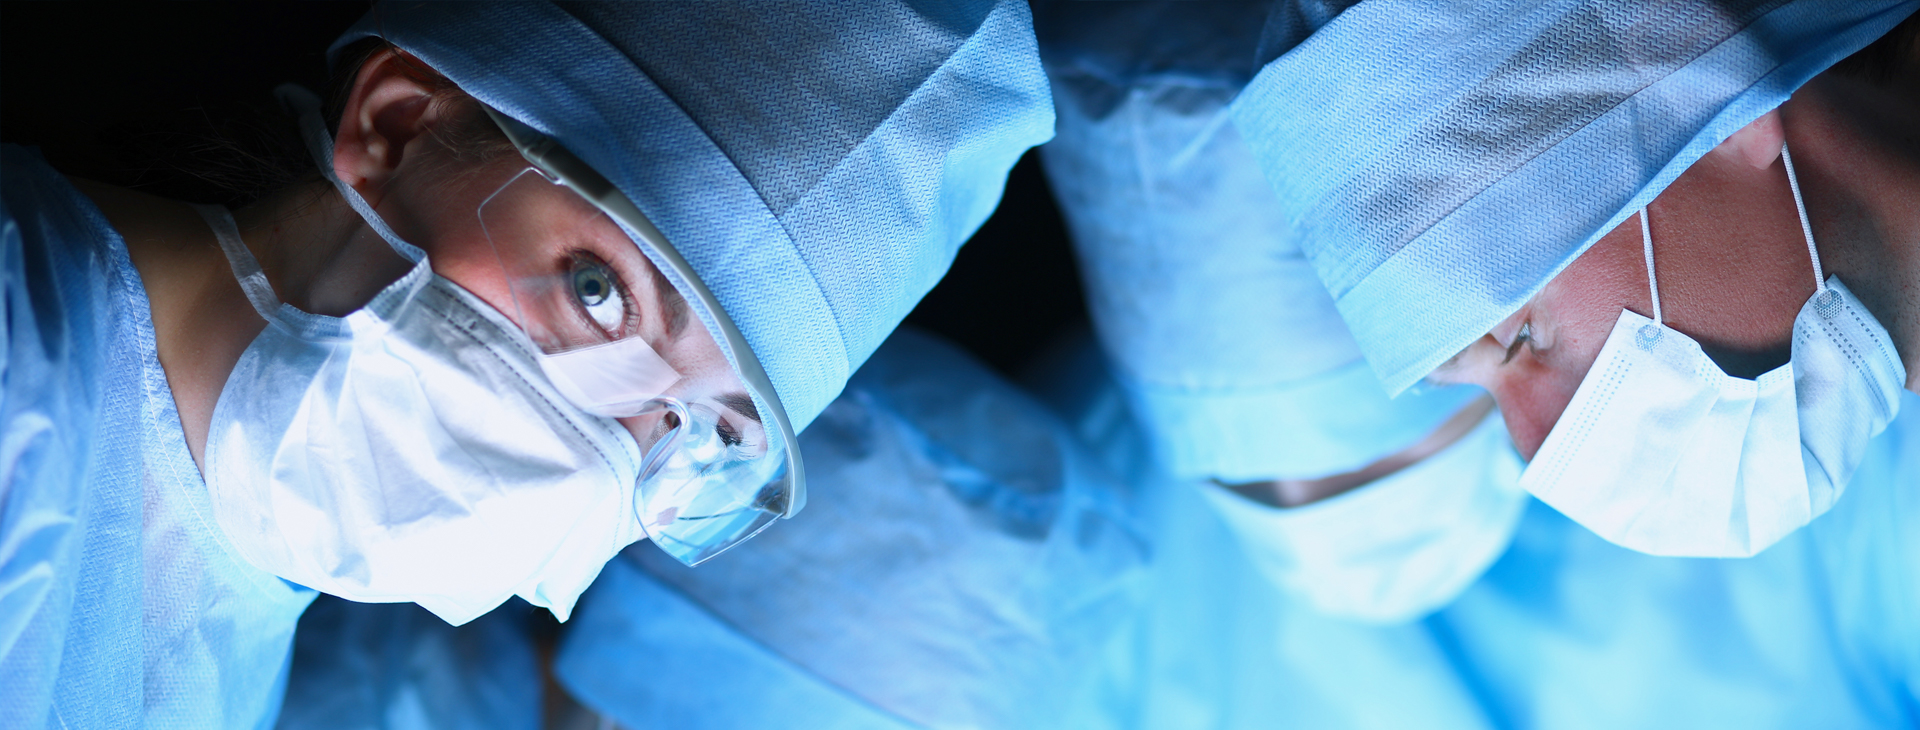 Competence in the operating theatre